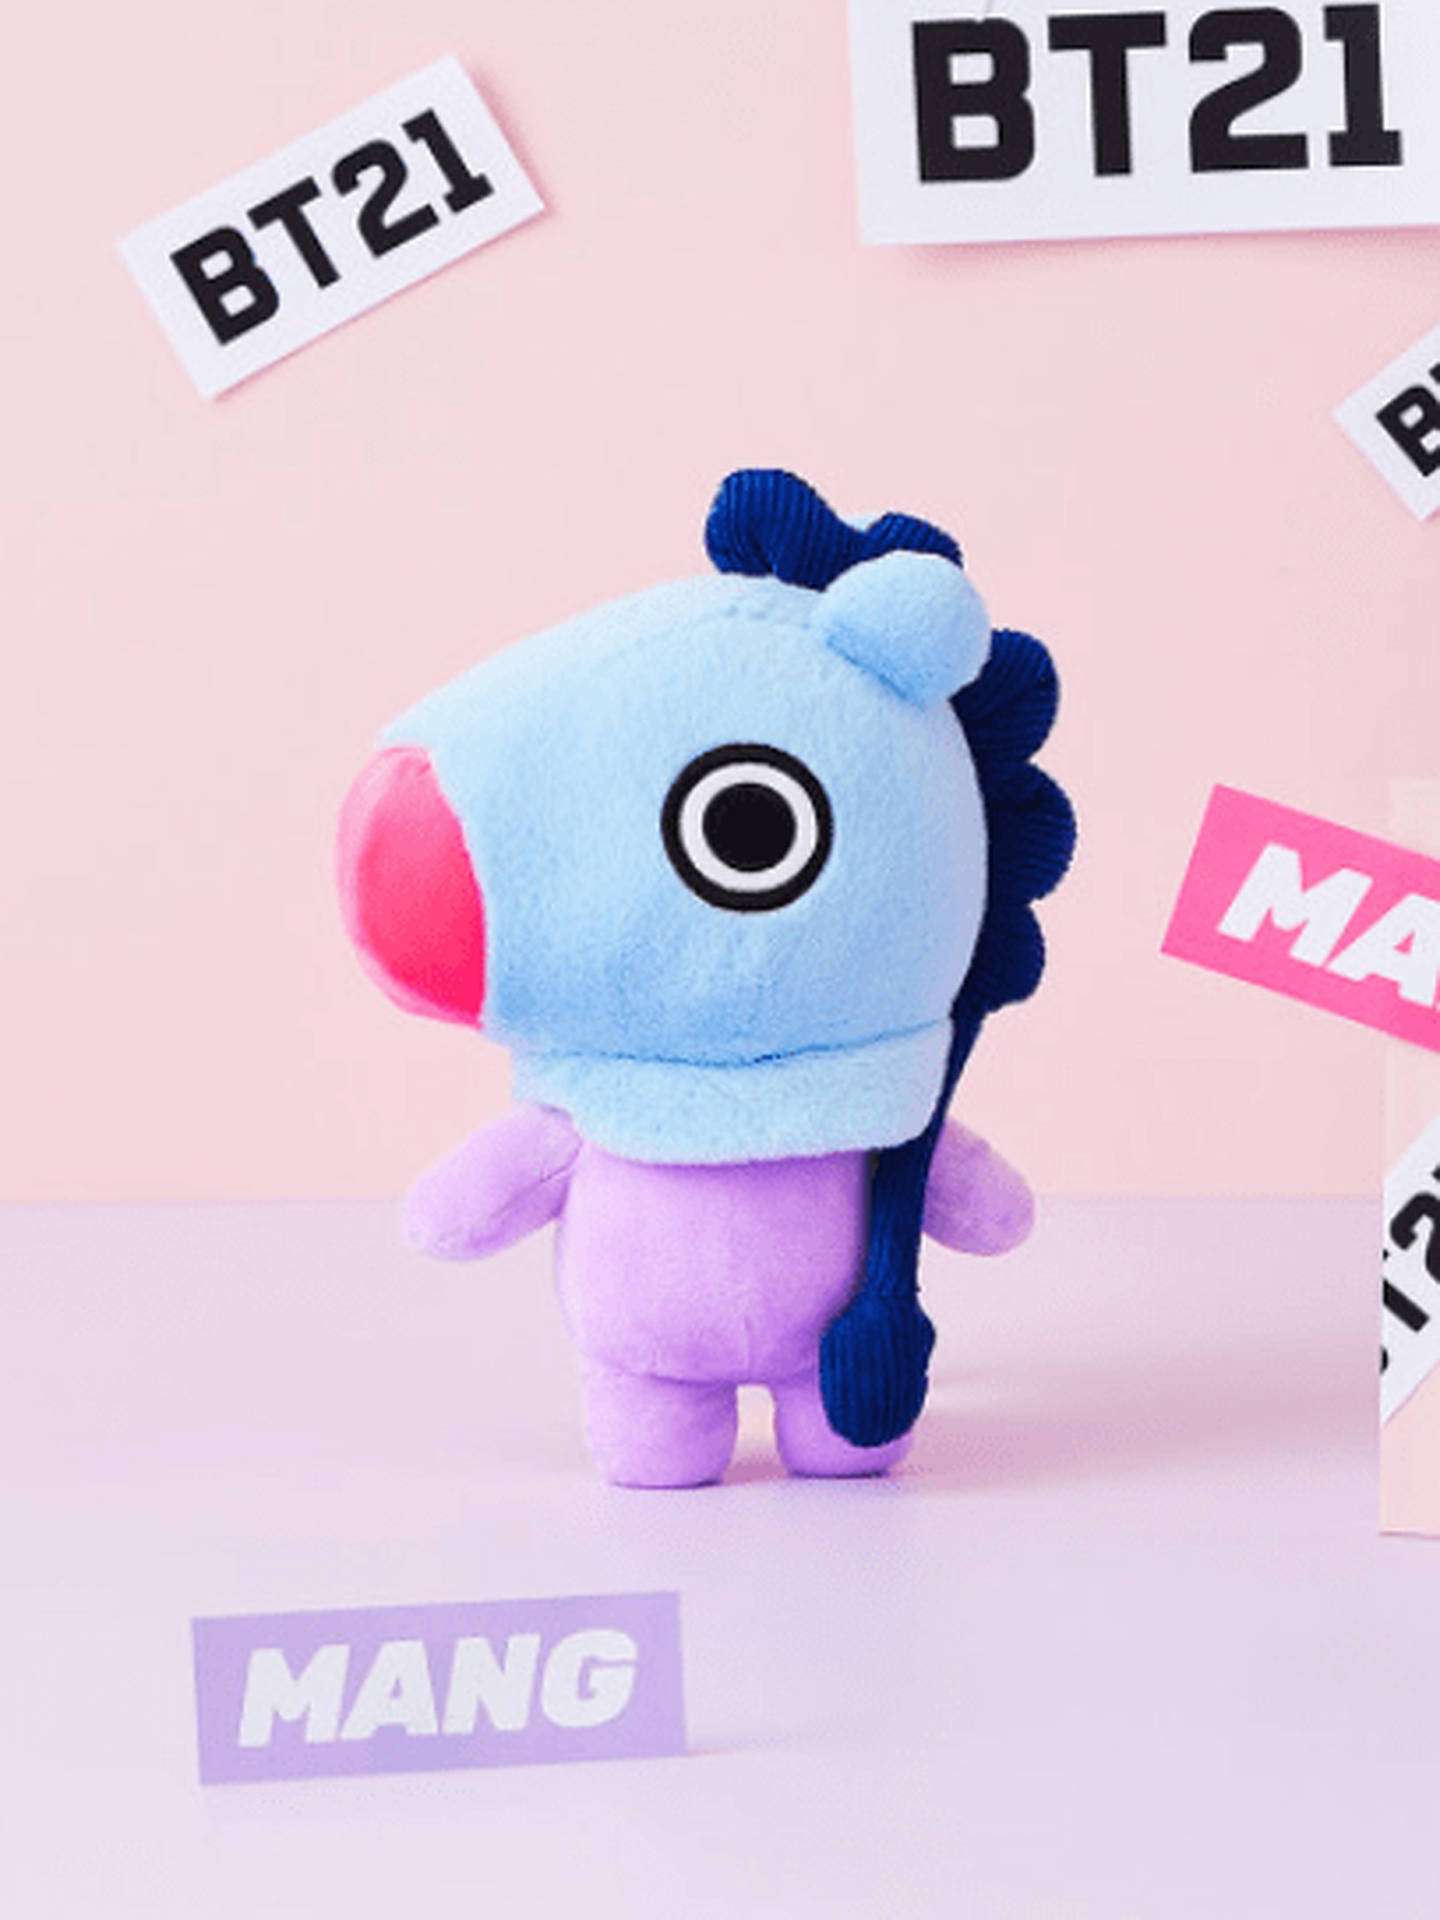 Mang Bt21 Stuffed Toy Background